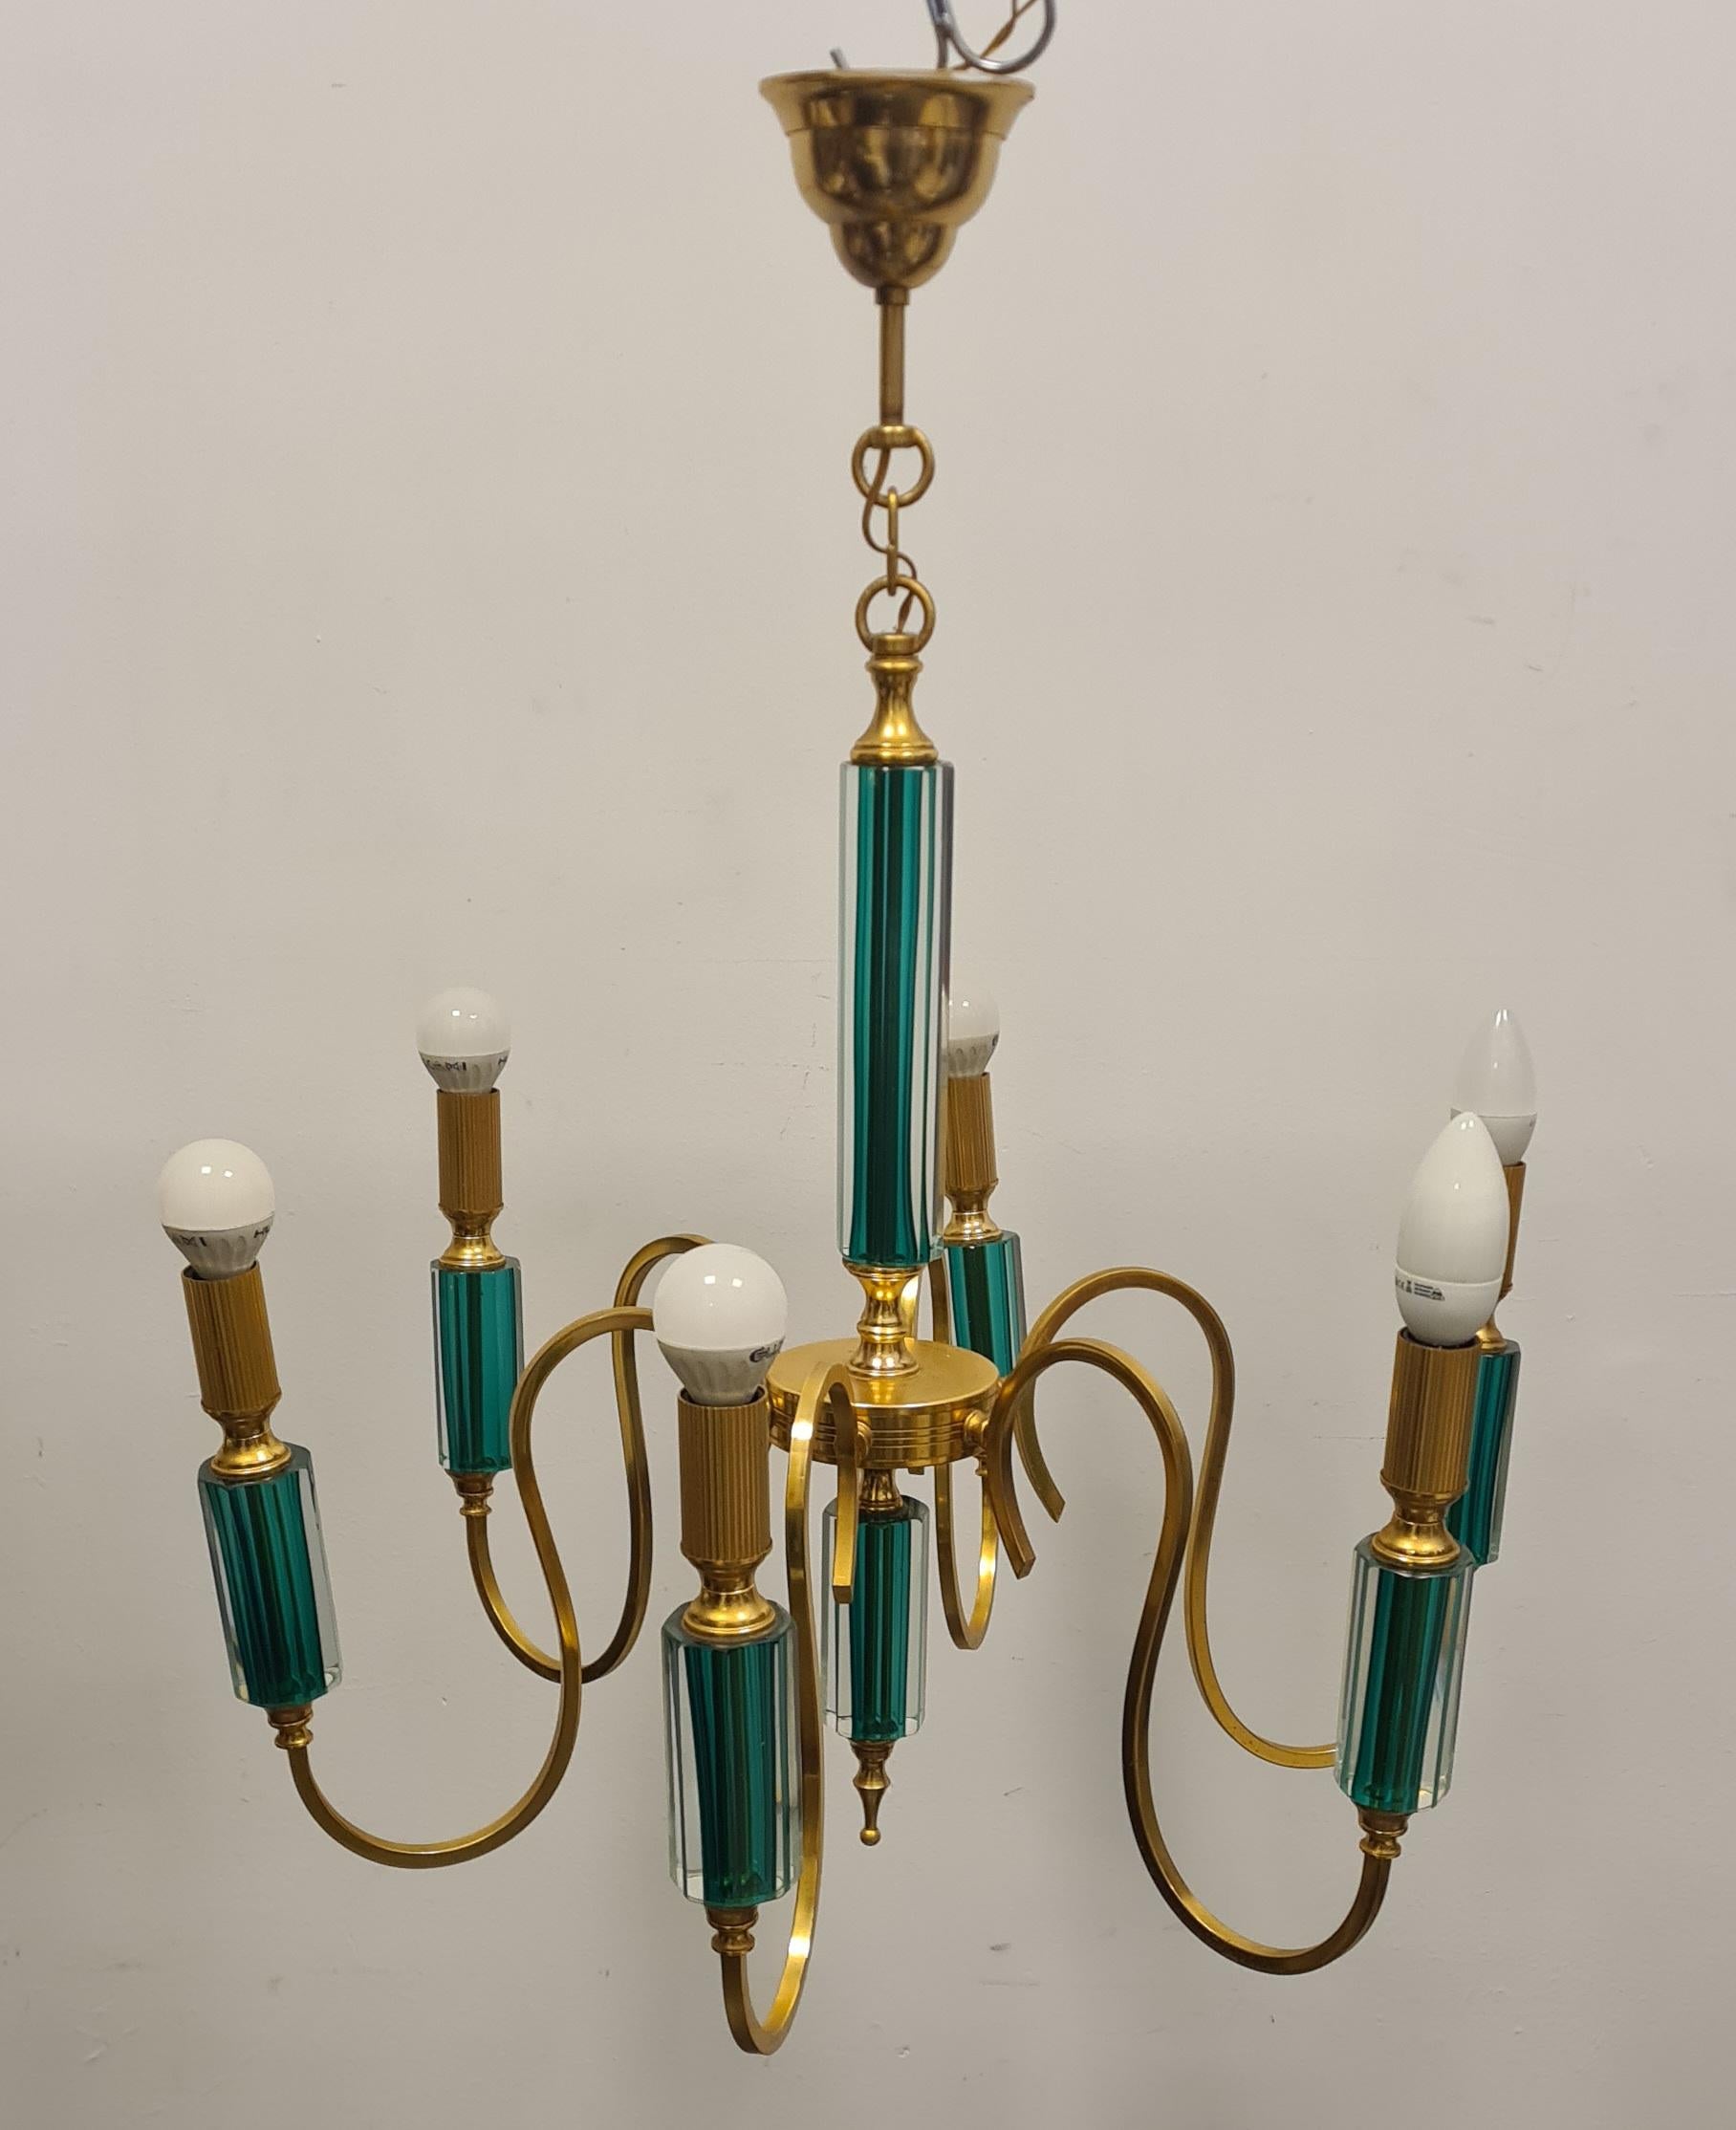 Six-light gold metal and glass chandelier.

Refined chandelier made with a golden metal frame and green-colored submerged glass decorations.

Elegant and extremely decorative this chandelier will add a touch of class to your rooms.

Ideal for